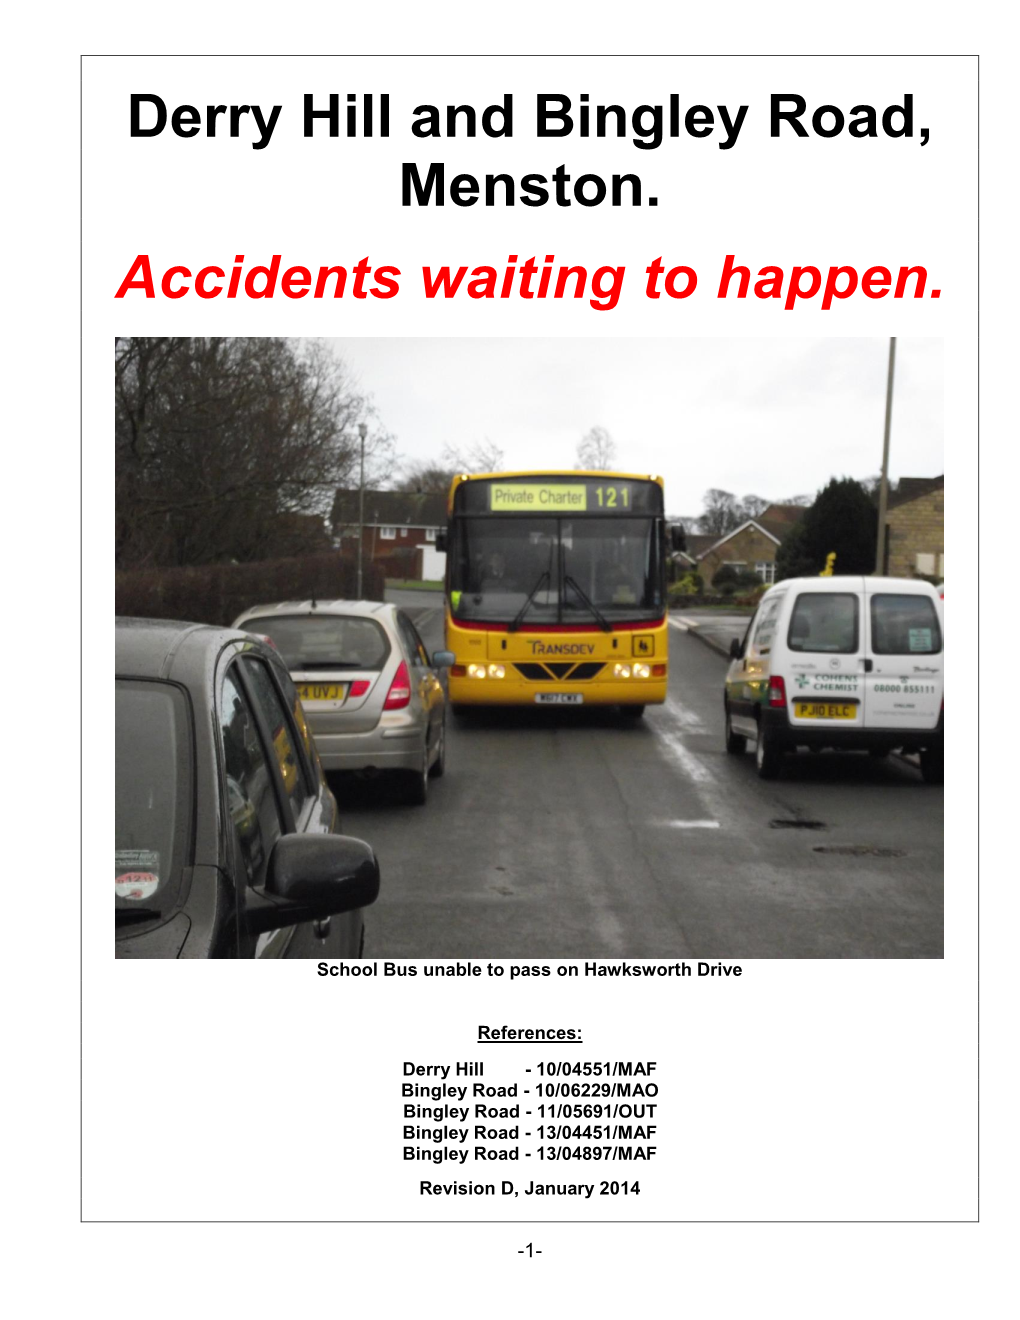 Derry Hill and Bingley Road, Menston. Accidents Waiting To